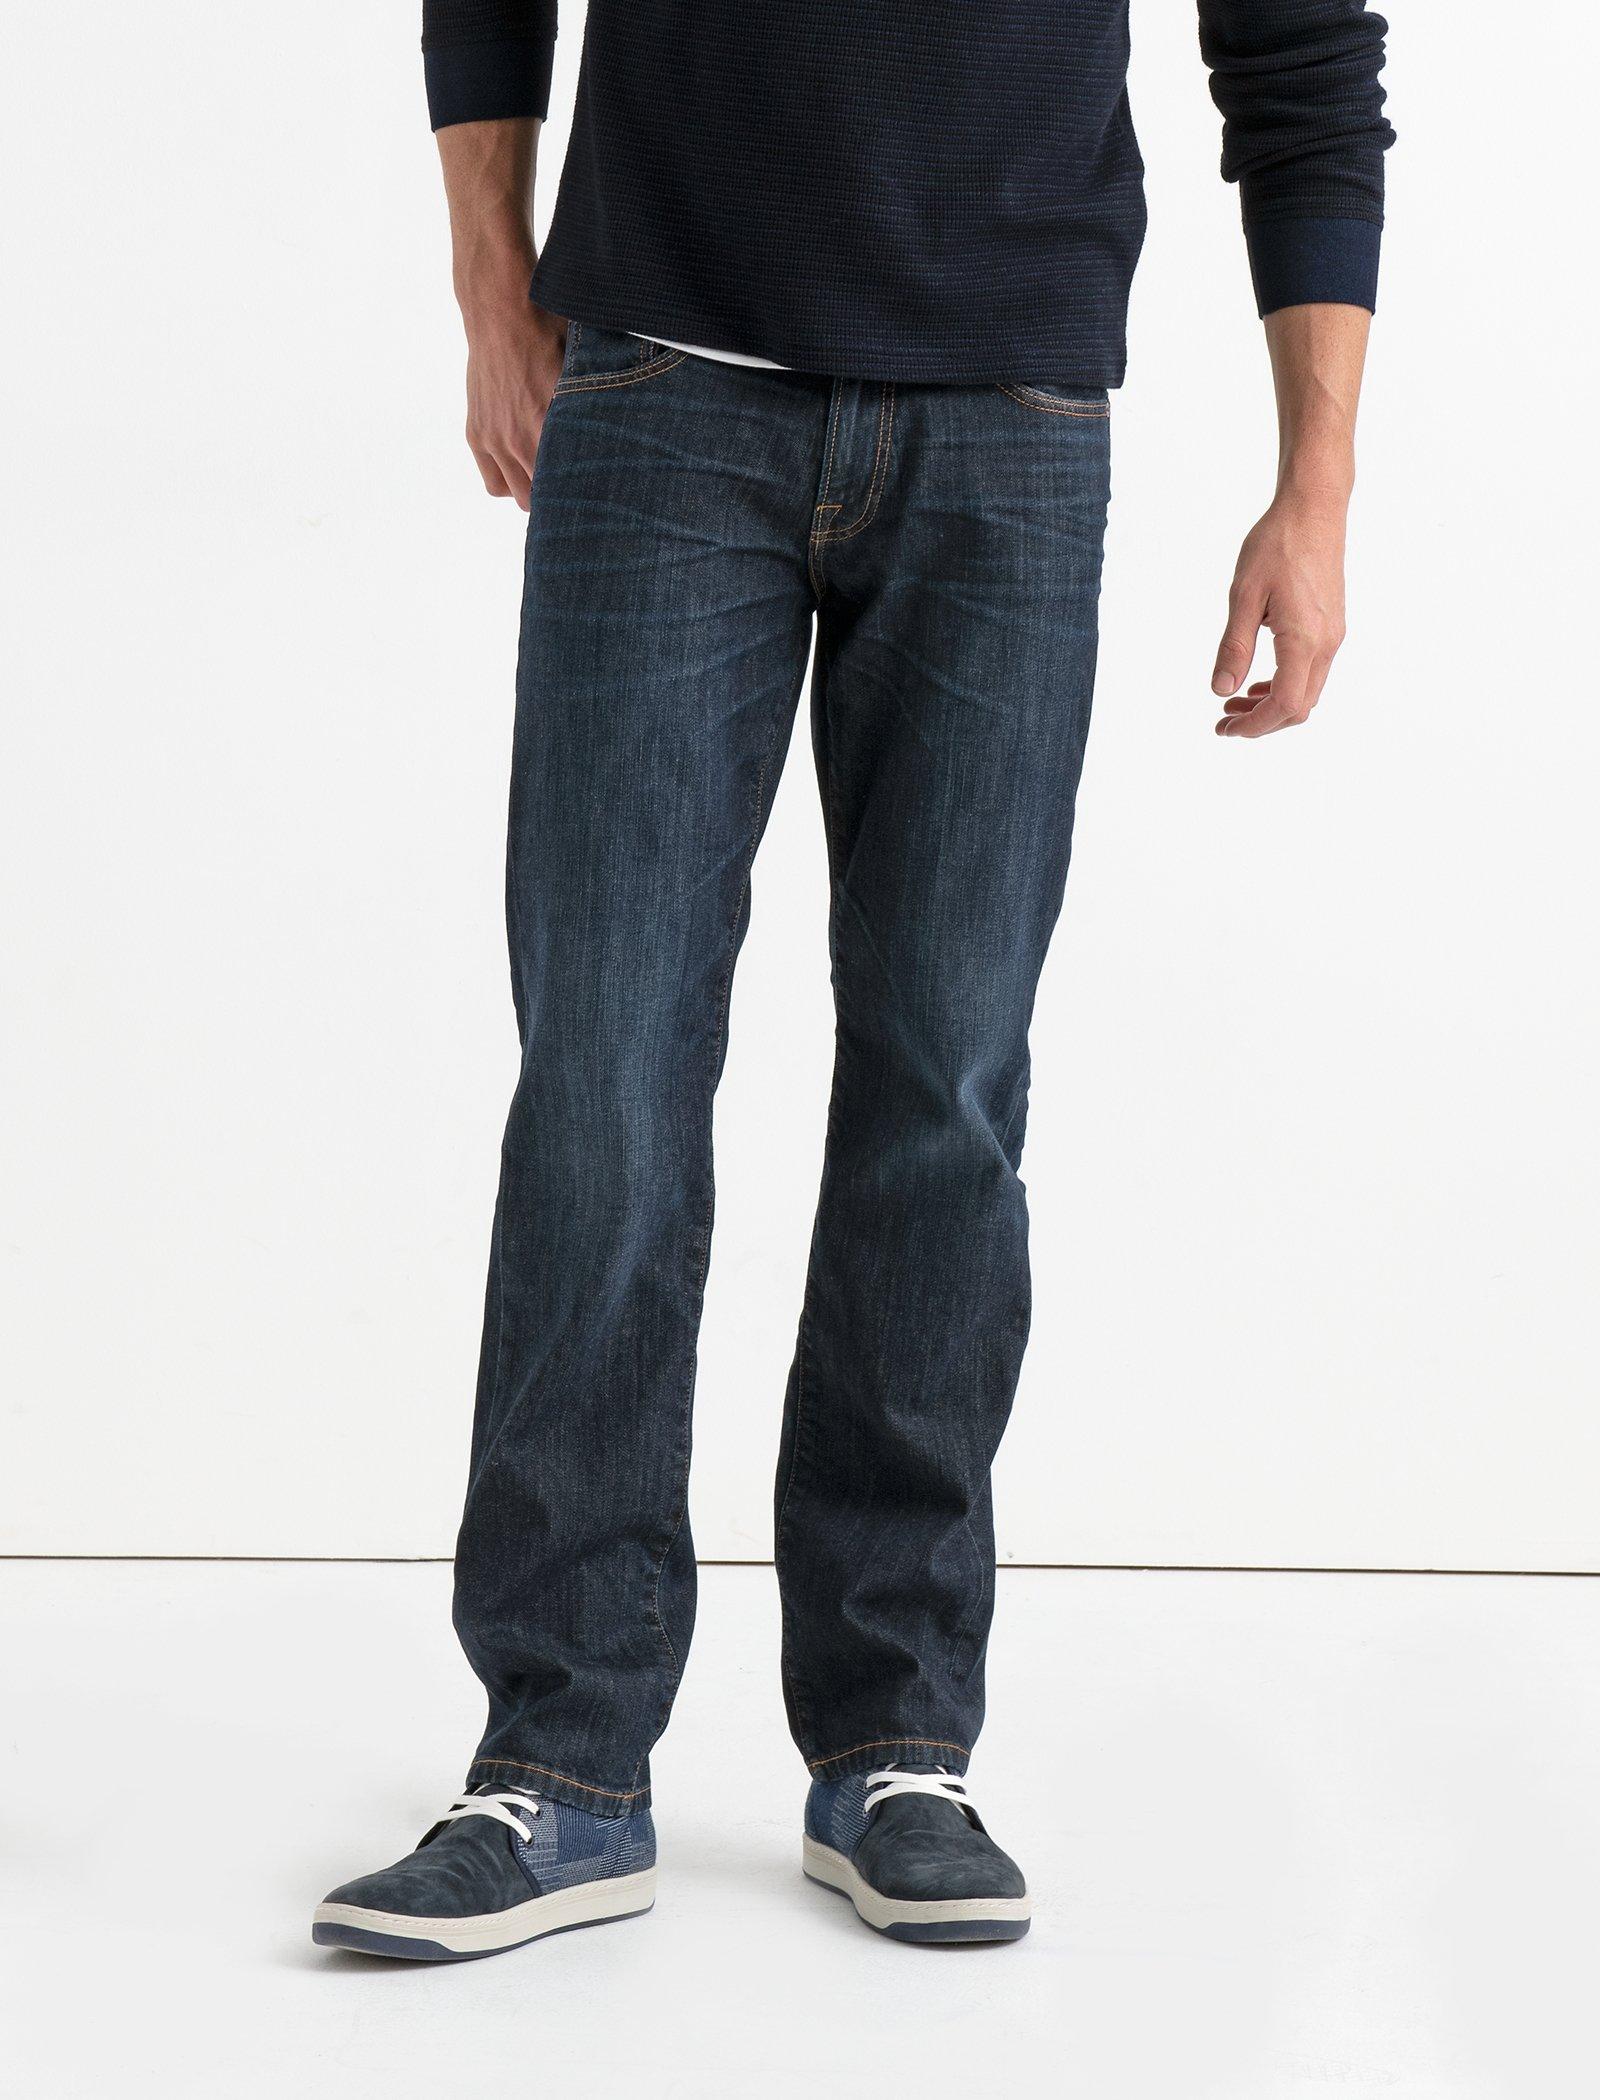 lucky brand jeans 221